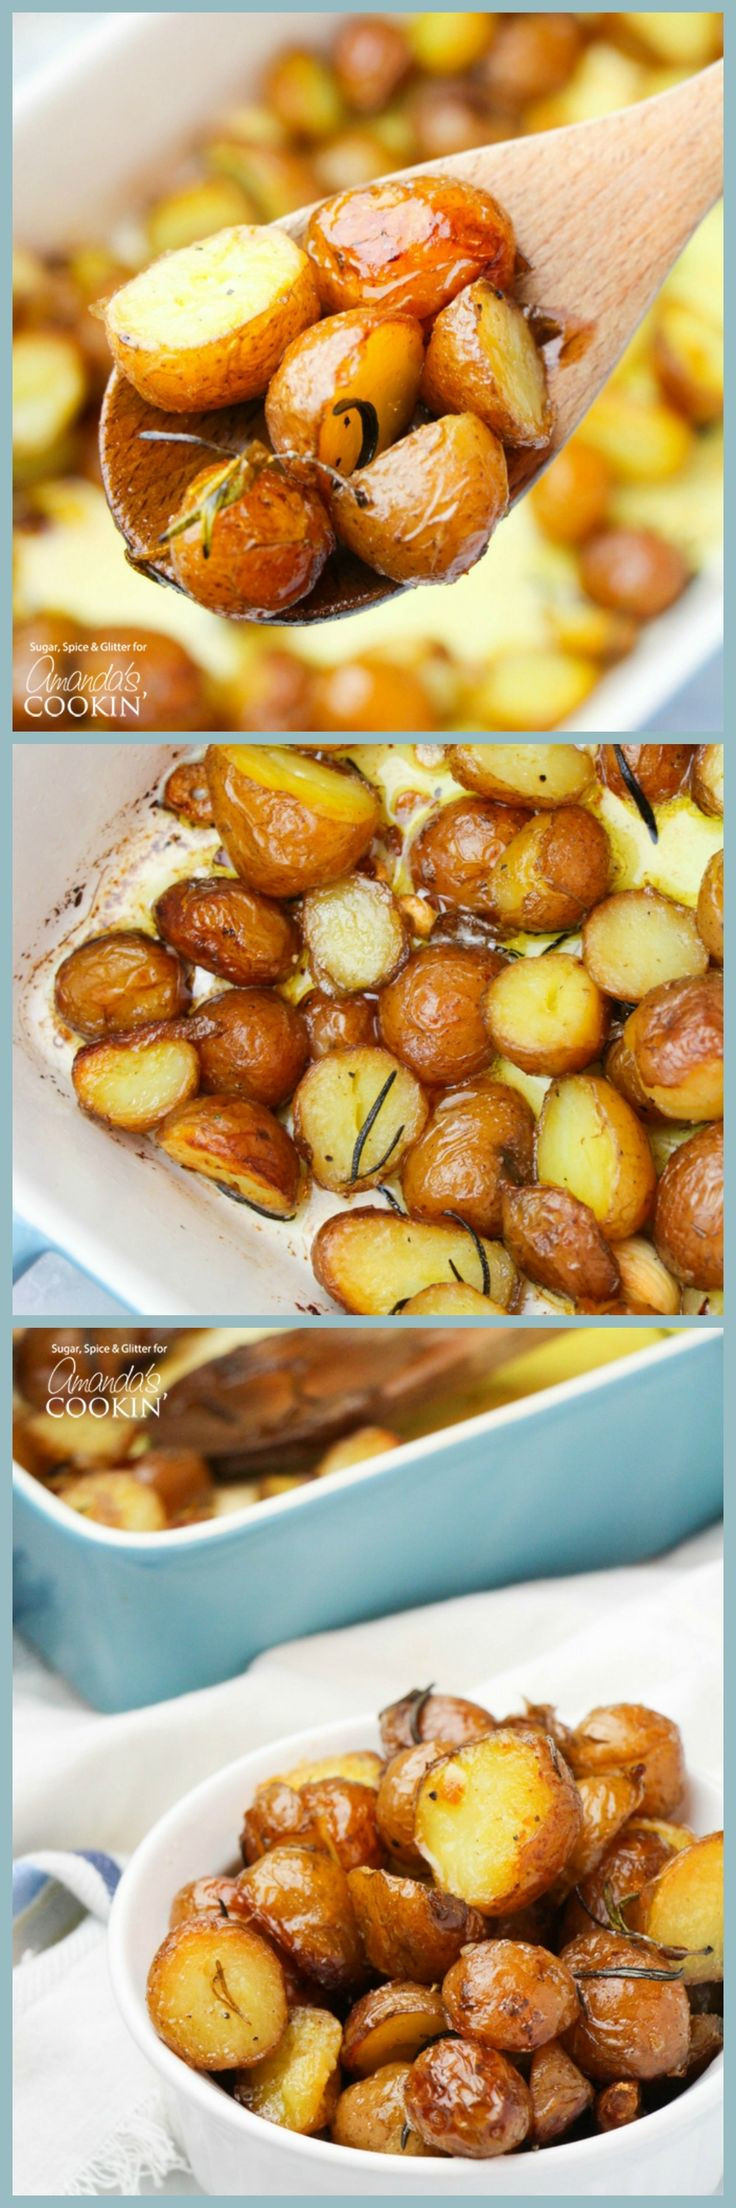 Thanksgiving Roasted Potatoes
 Best 25 Side dish recipes ideas on Pinterest